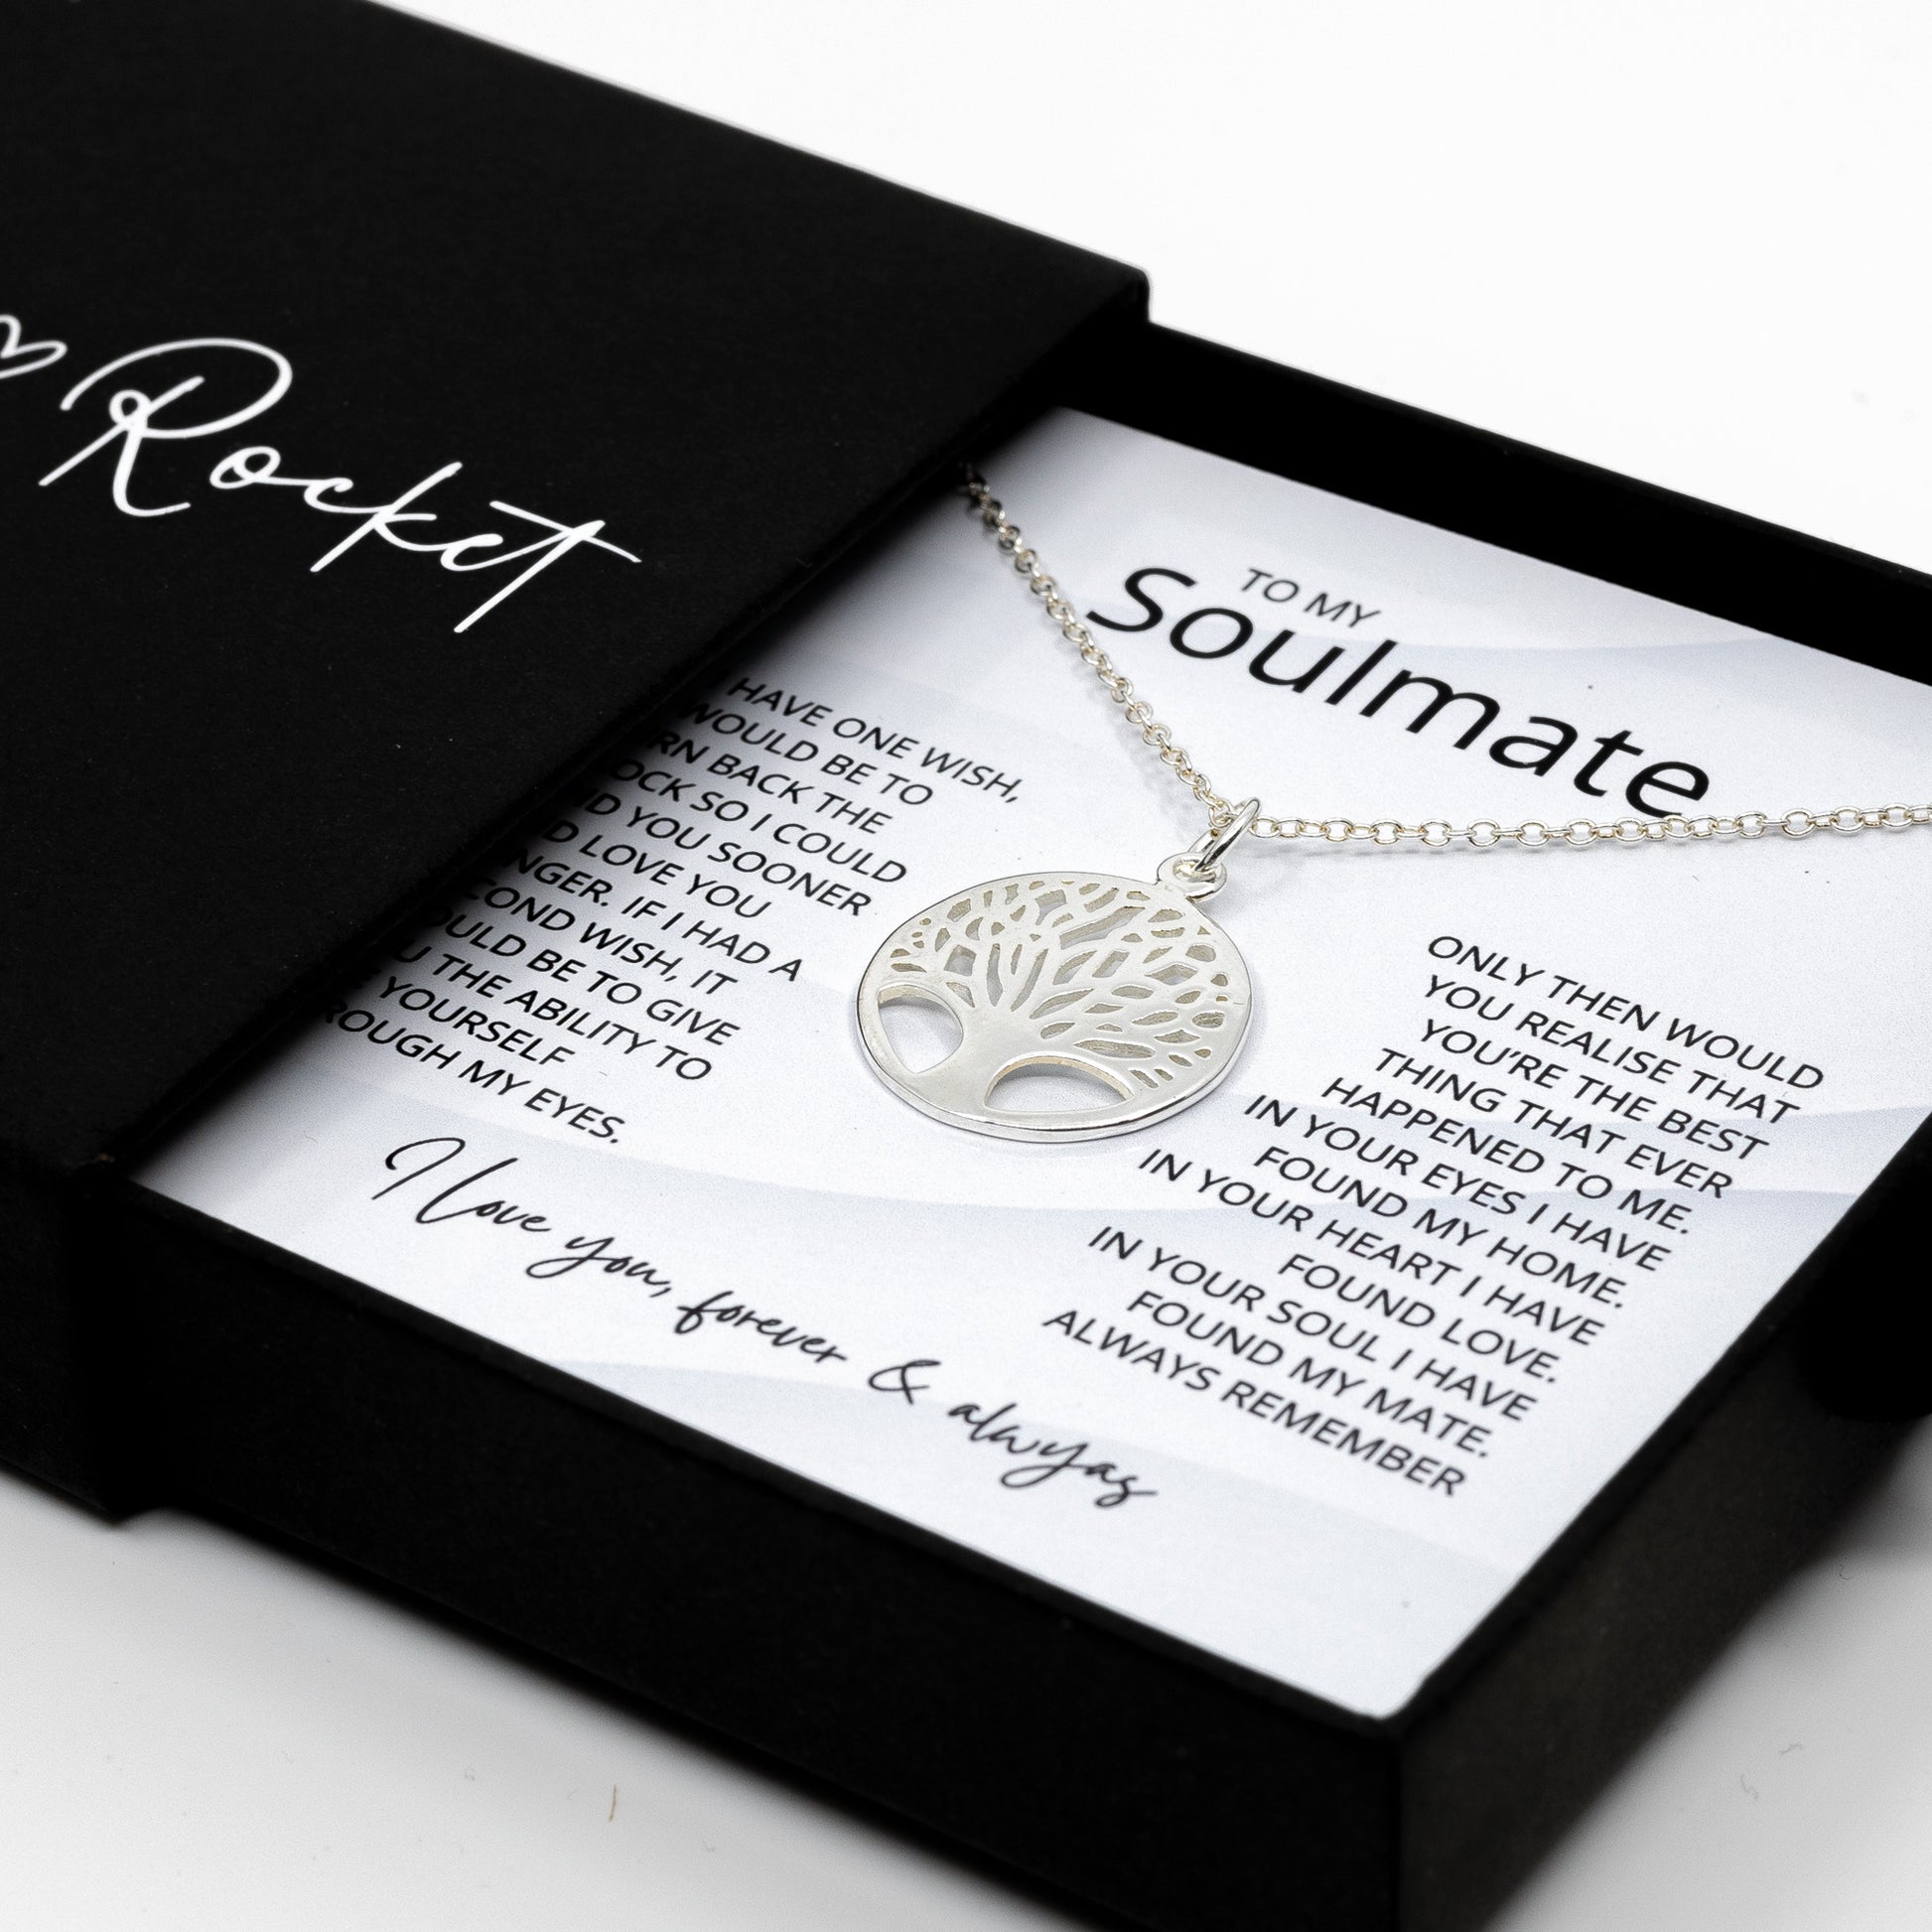 To My Soulmate my Alluring Beauty, Valentines Anniversary Gift For Her, Soulmate Gift From Him